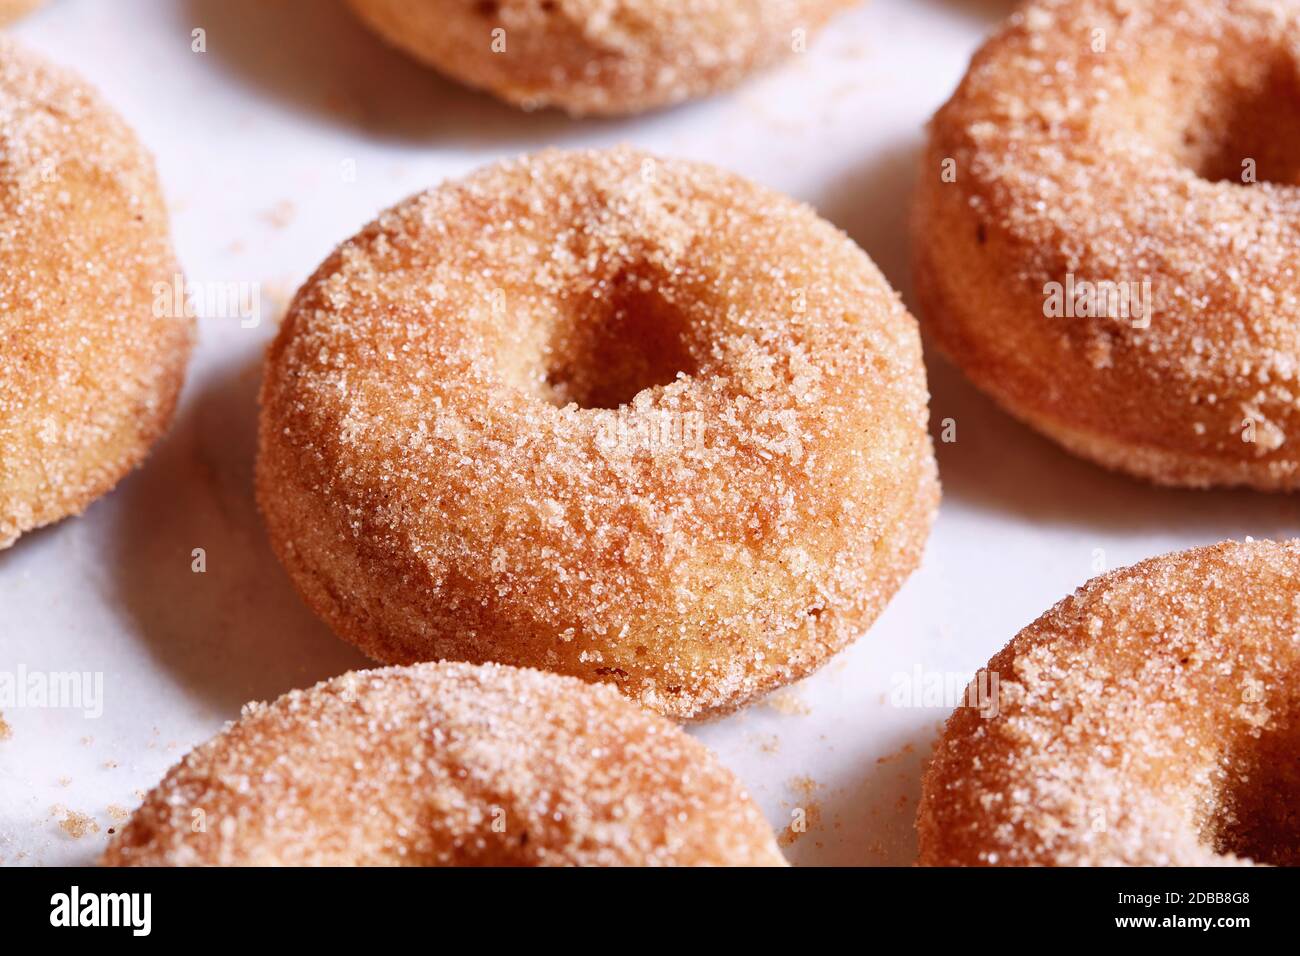 Close-up of donuts Stock Photo